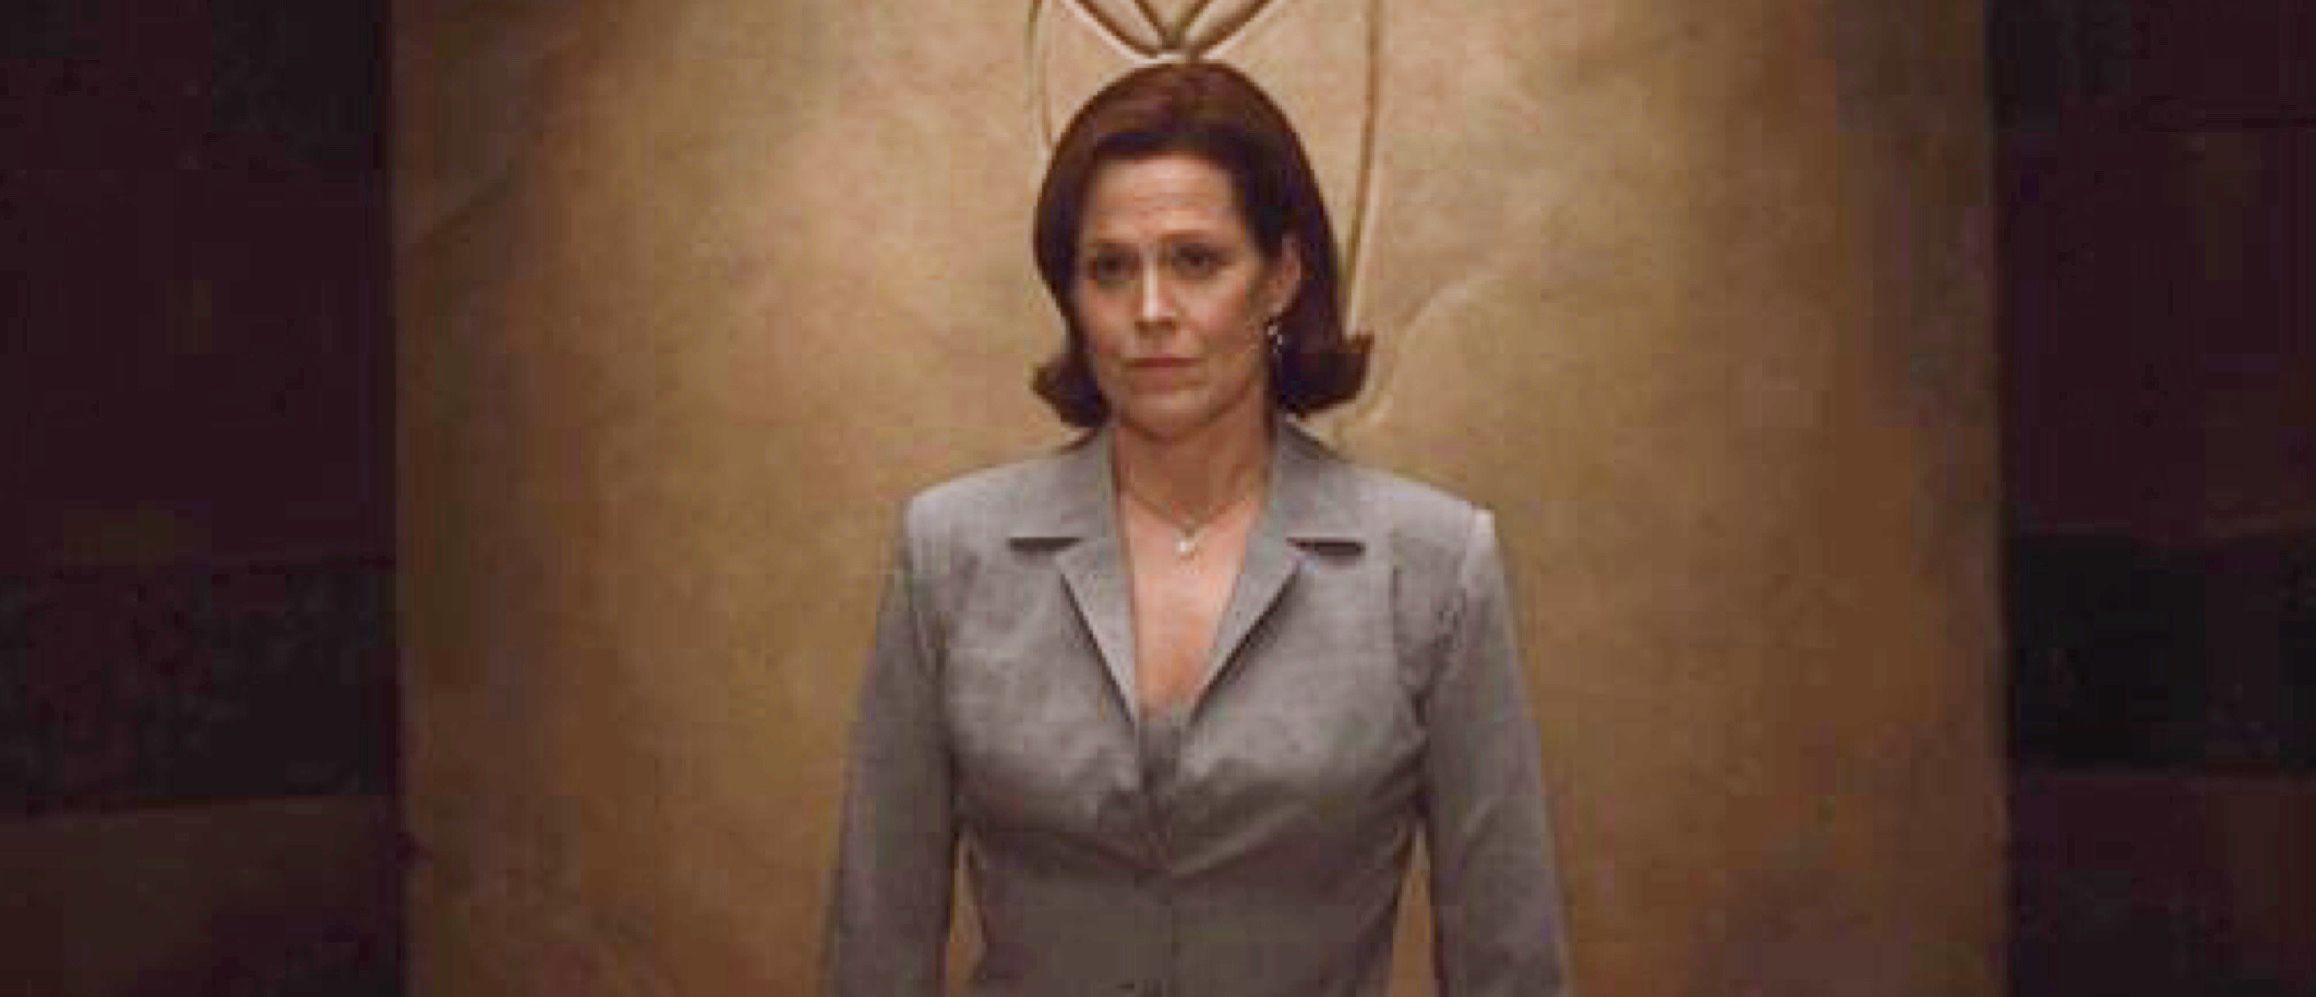 The Cabin in the Woods Sigourney Weaver image